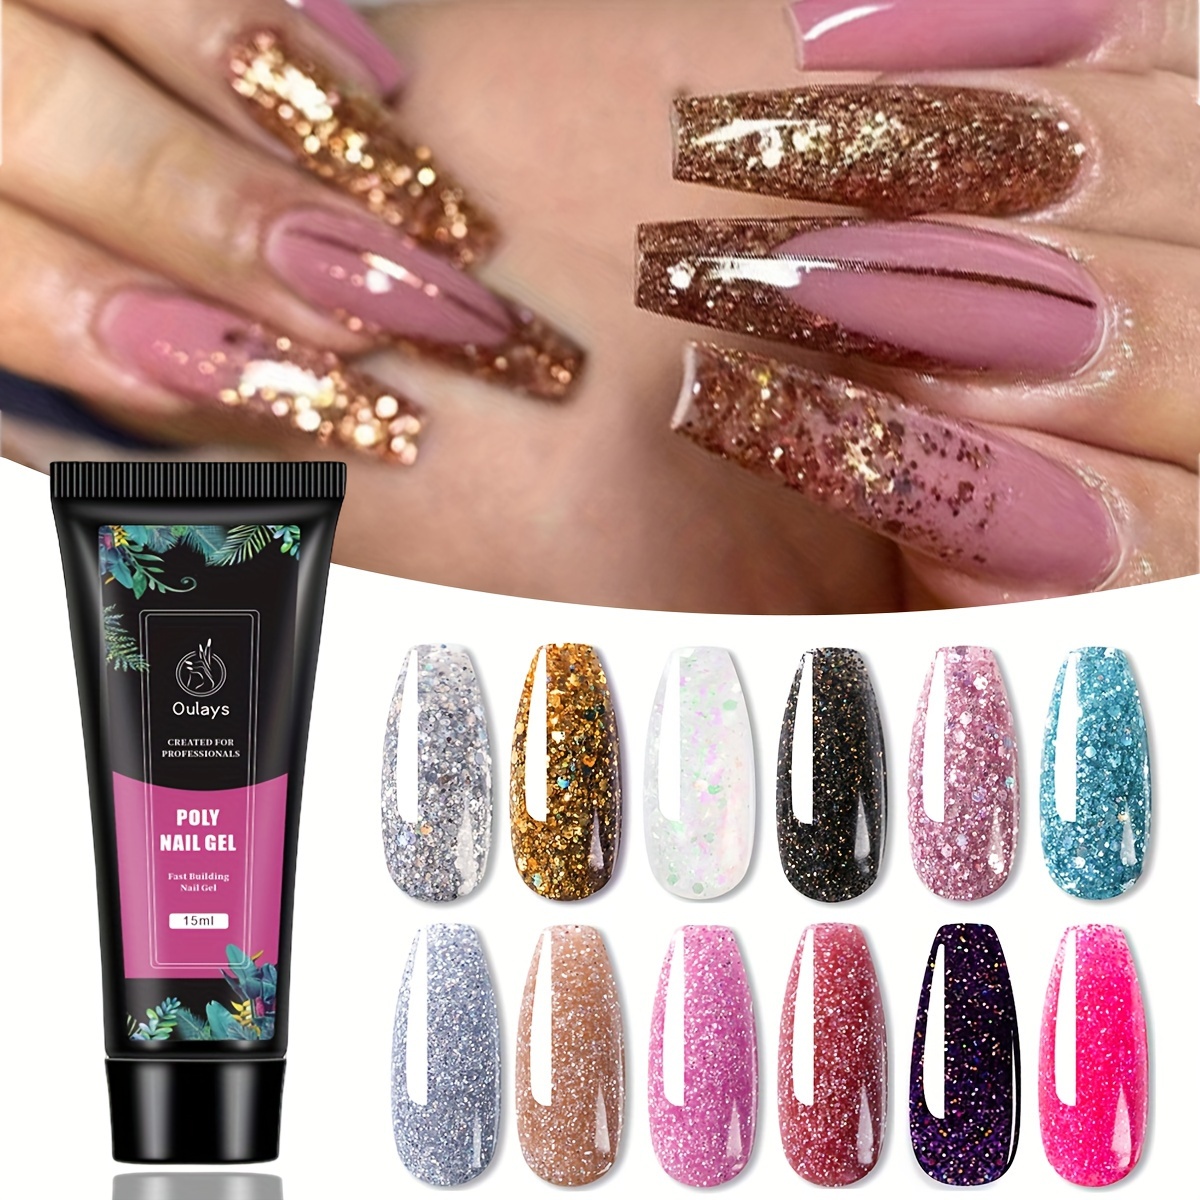 

Glitter Poly Gel Nail Kit, Shiny Nail Extension Gel, Long-lasting Nail Art Design Manicure Set, Ideal For Creative Nail Styling & Enhancement